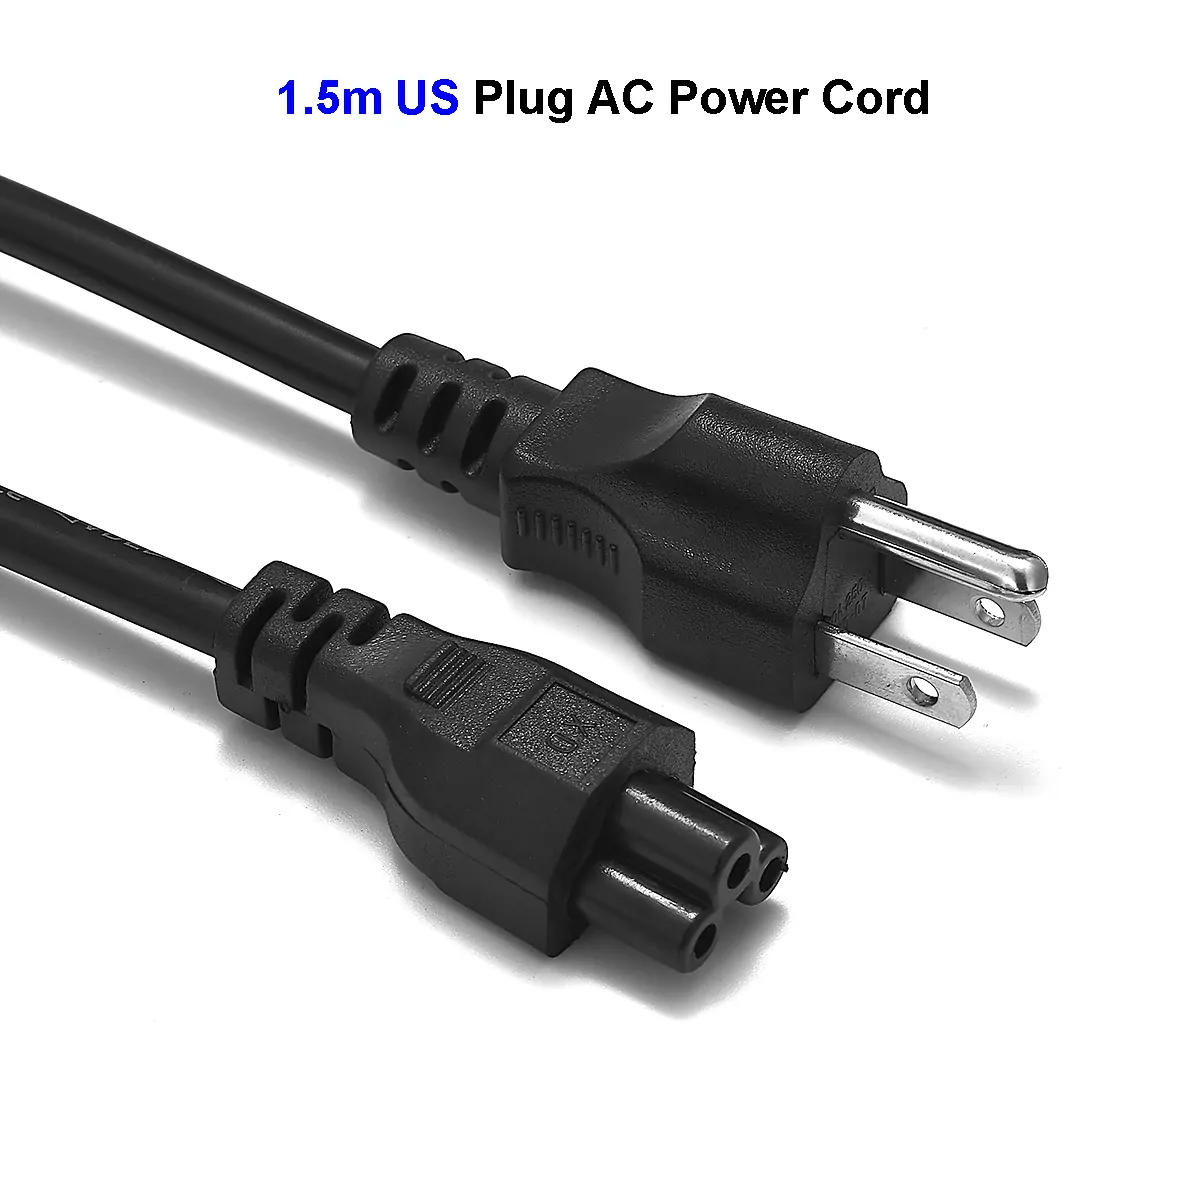 US Plug Power Cable 3 Pin Prong C5 Cloverleaf American USA Power Cable Cord 1.2m 4ft For AC Adapters Laptop Notebook